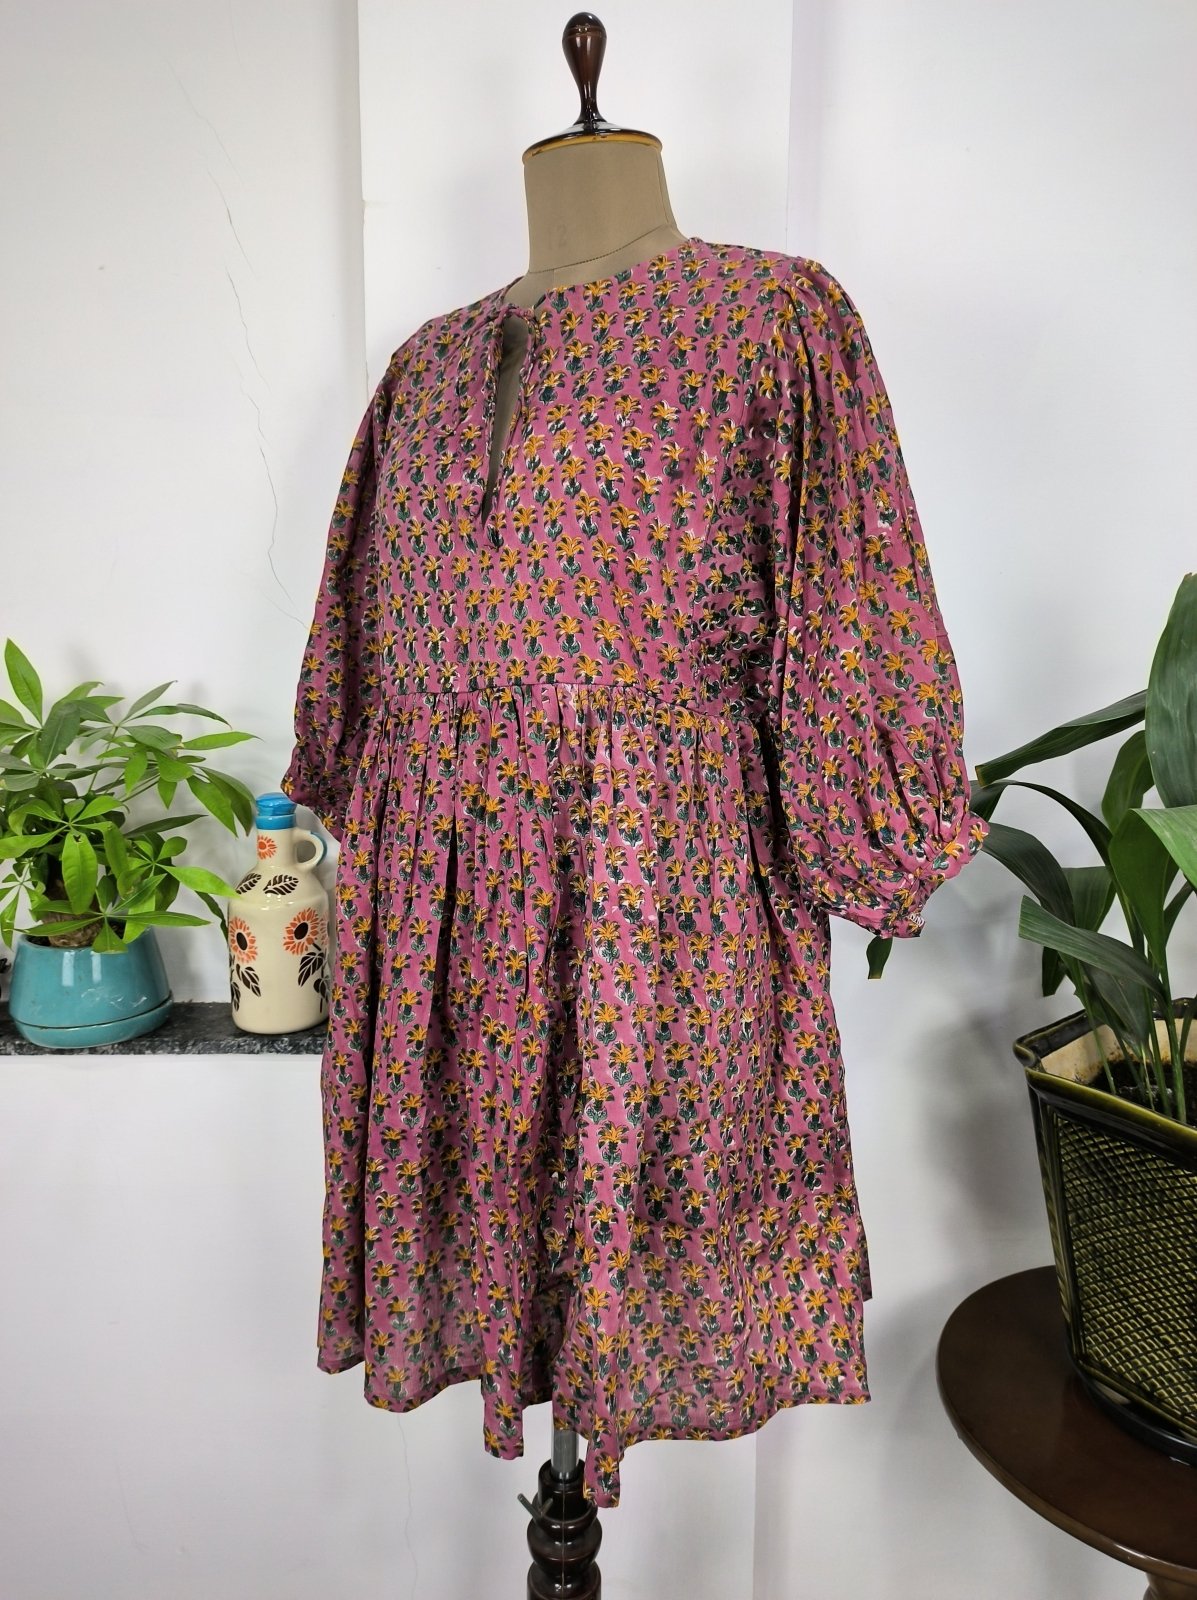 Cotton Dress Hand Block Printed Short Length Hand Stitched | Perfect Anniversary Christmas Gift Her Sister Mother | Wine Yellow Green Floral - The Eastern Loom